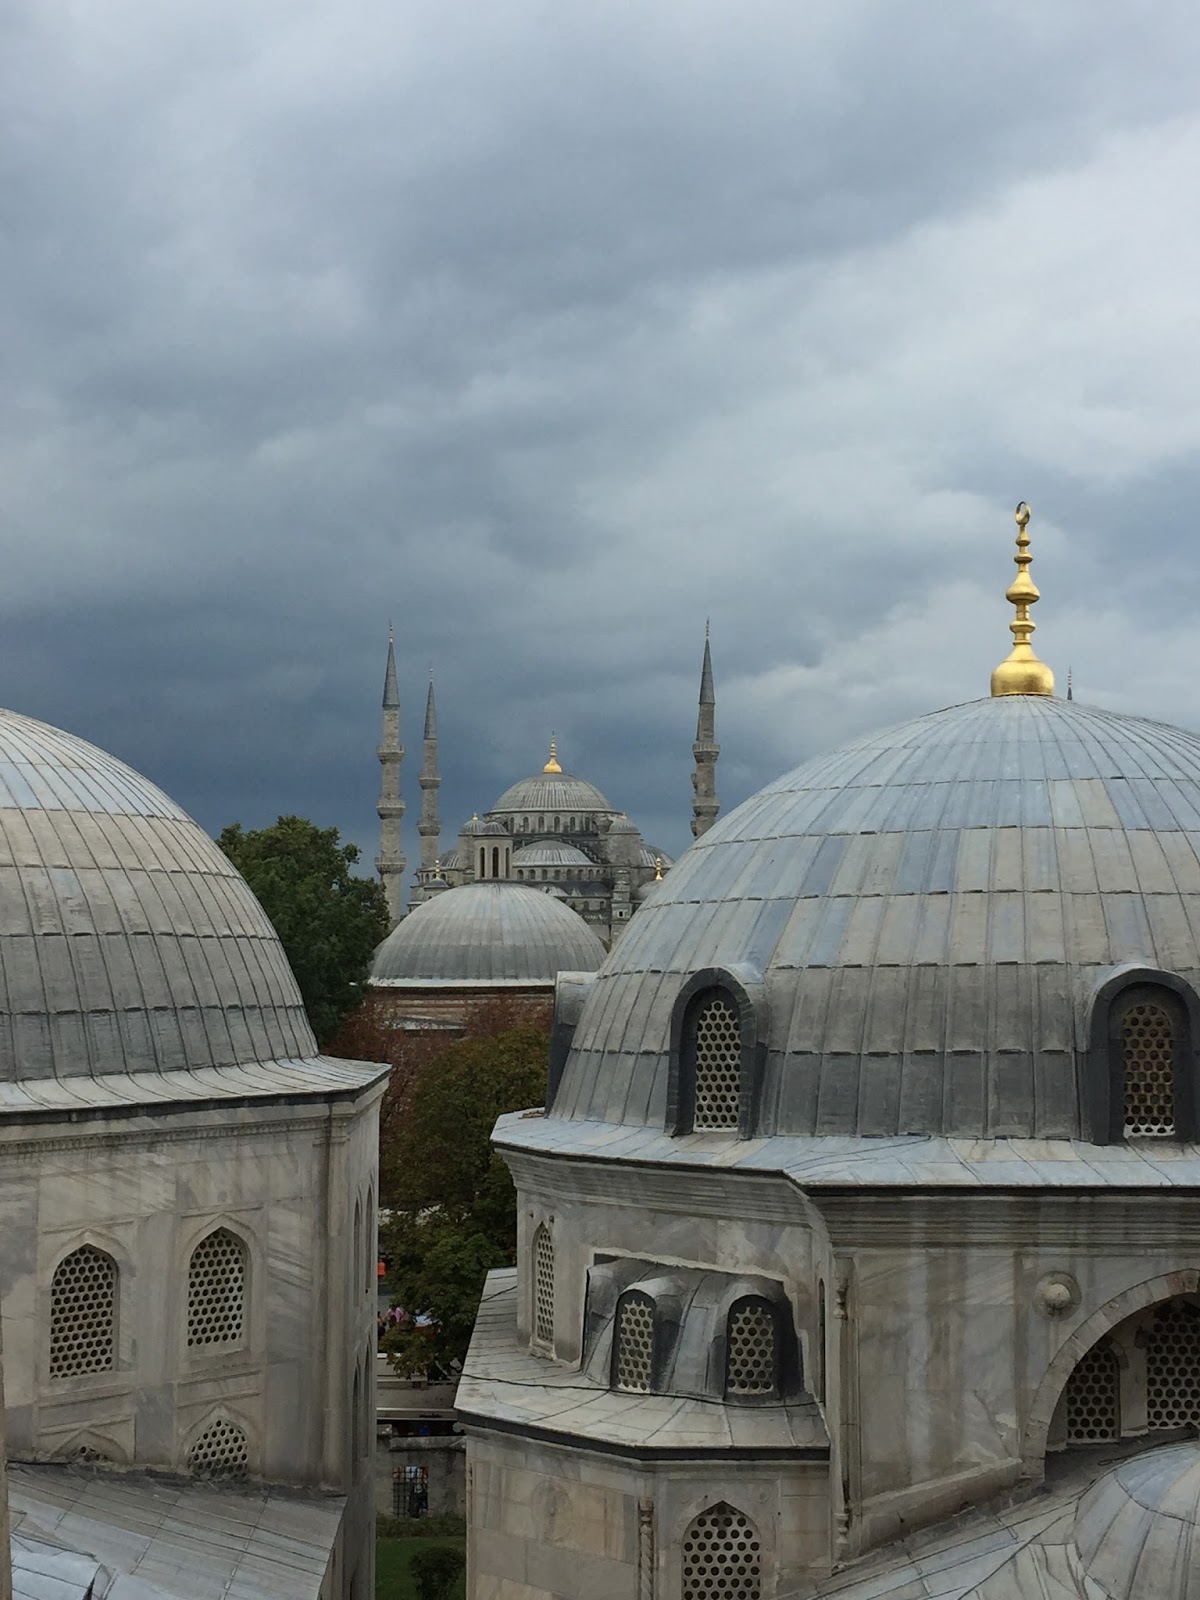 From Hagia Sophia to the Blue Mosque